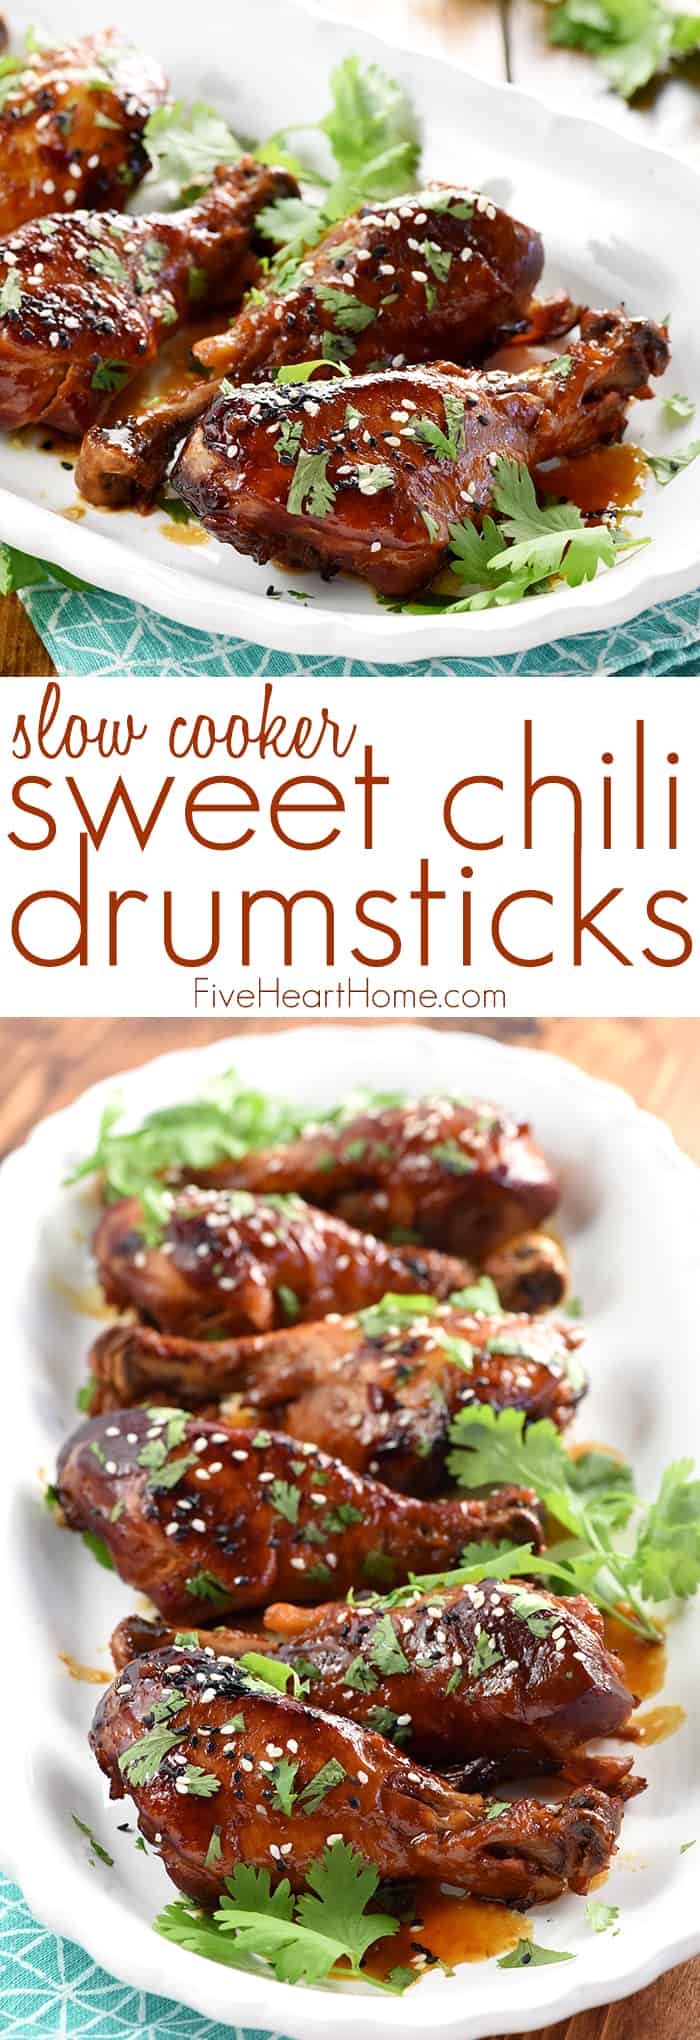 Sweet Chili Crockpot Chicken Drumsticks collage with text